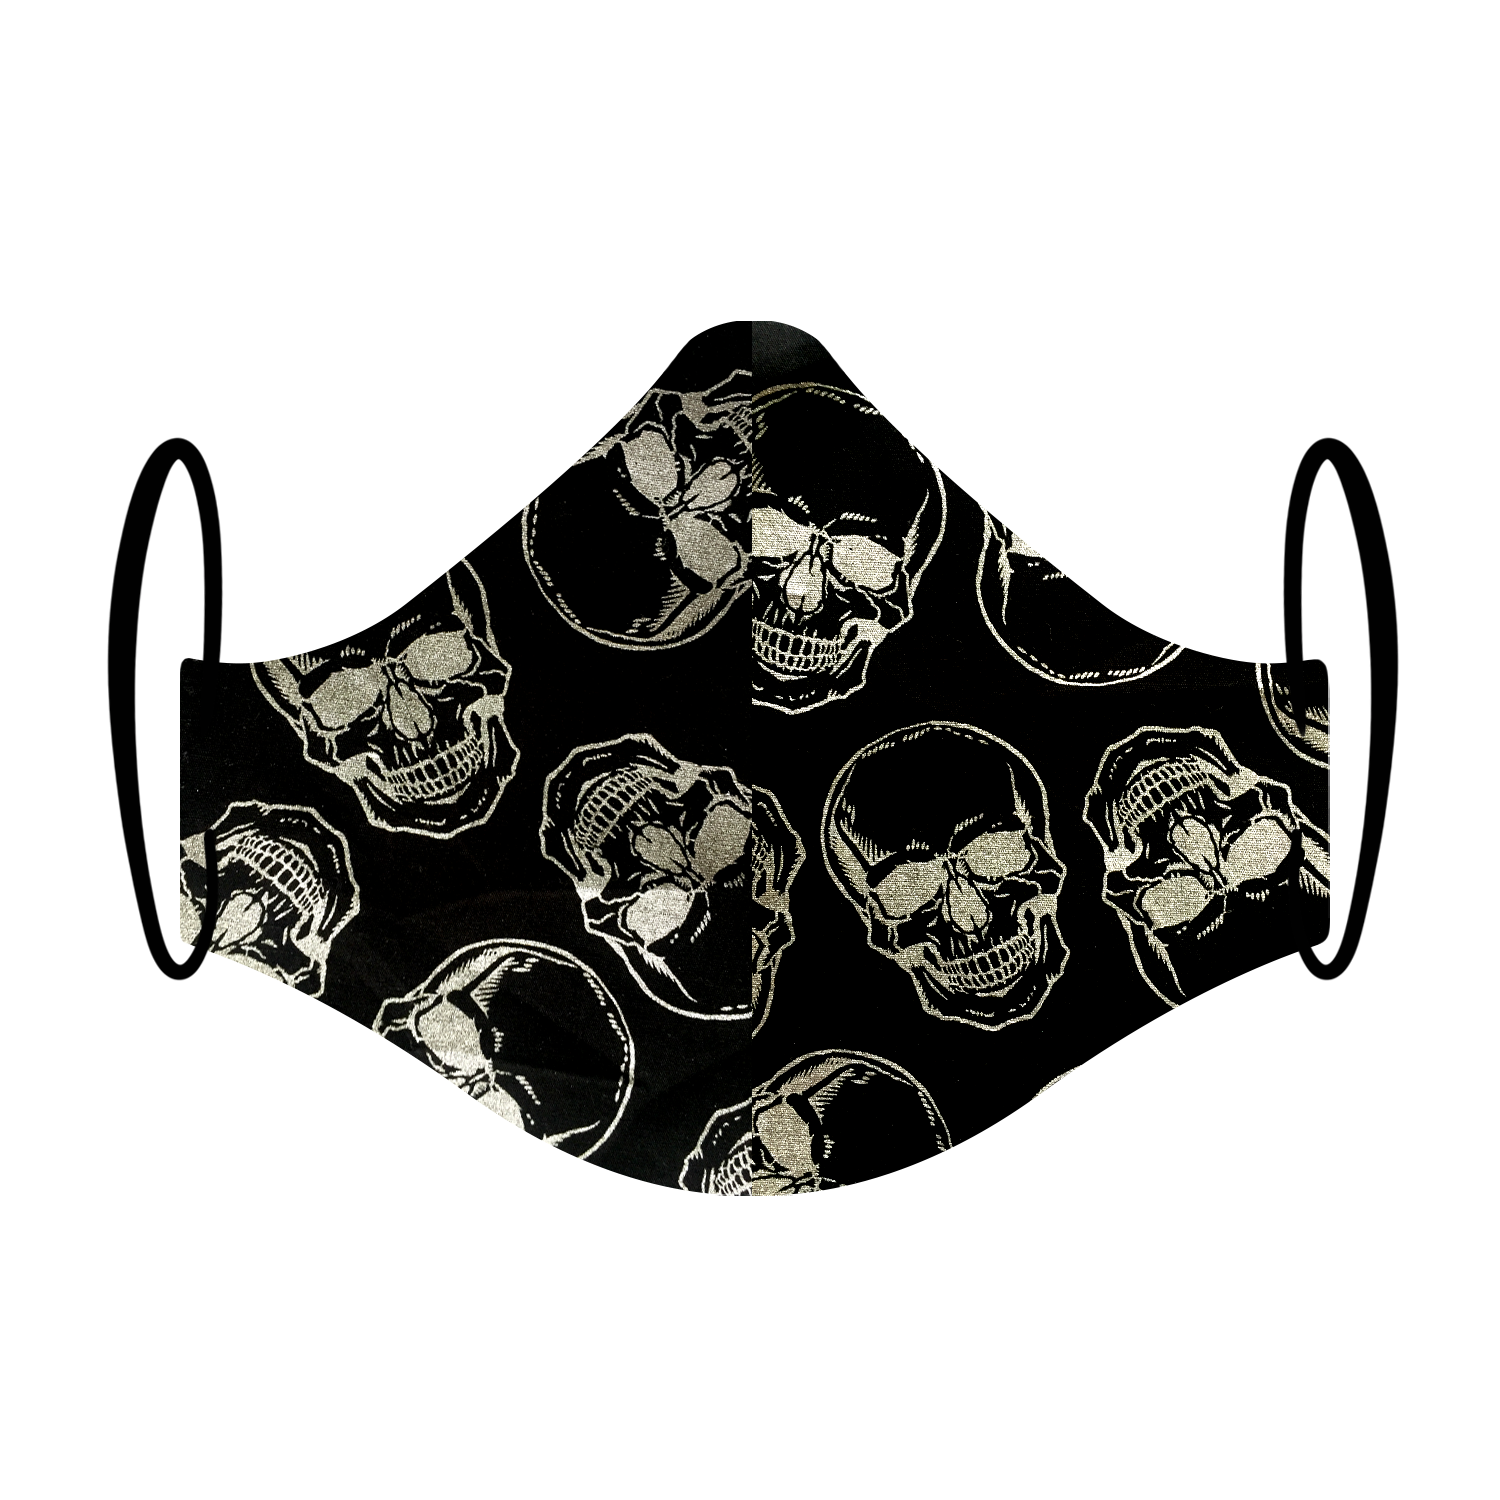 Triple layered face mask made in Melbourne Australia from cotton and poplin featuring a unique metal silver skulls print